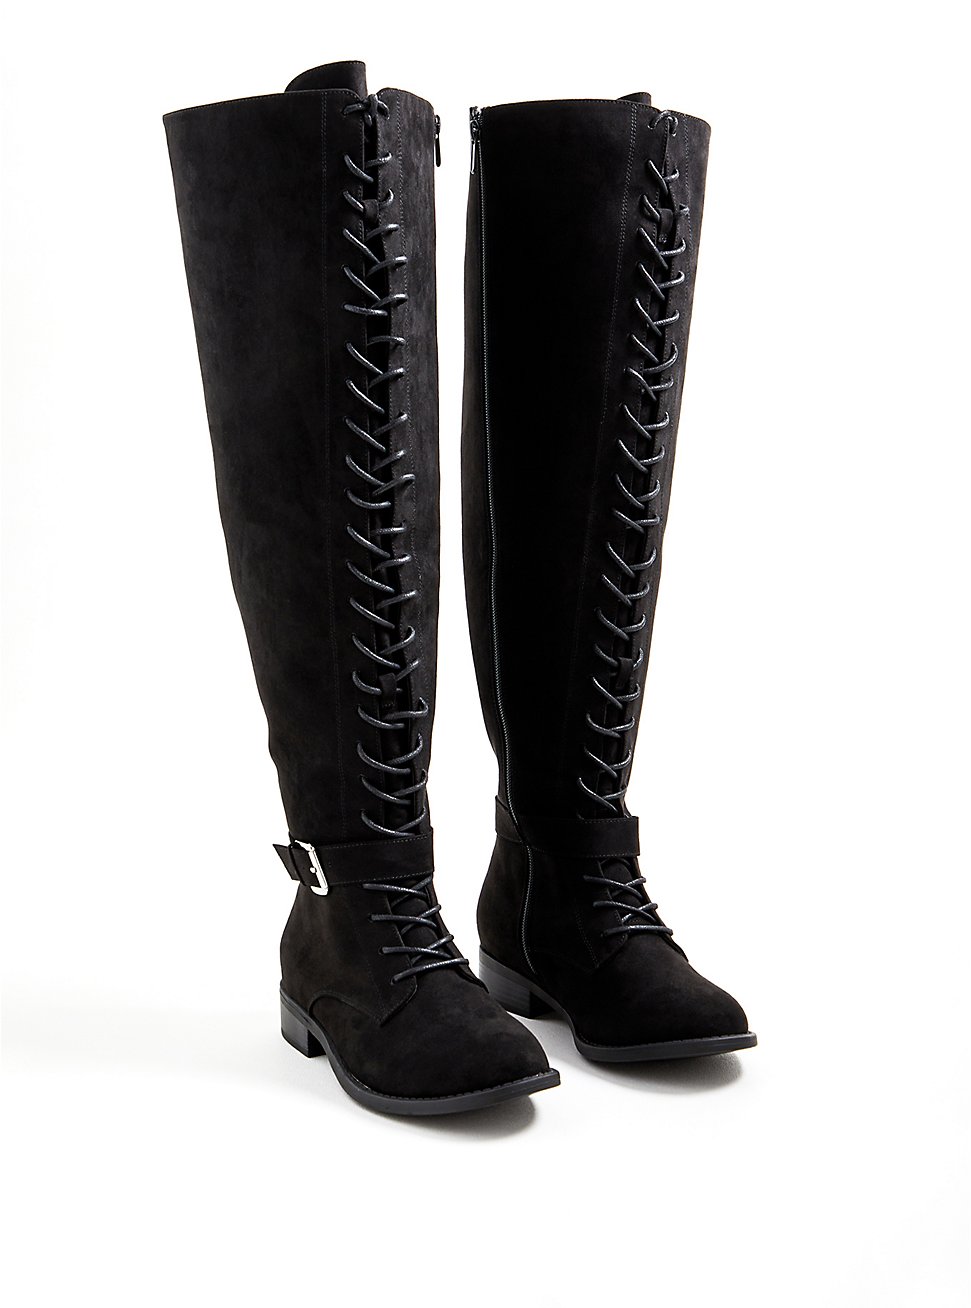 Double Buckle Over The Knee Boot - Faux Suede Black (WW), BLACK, hi-res